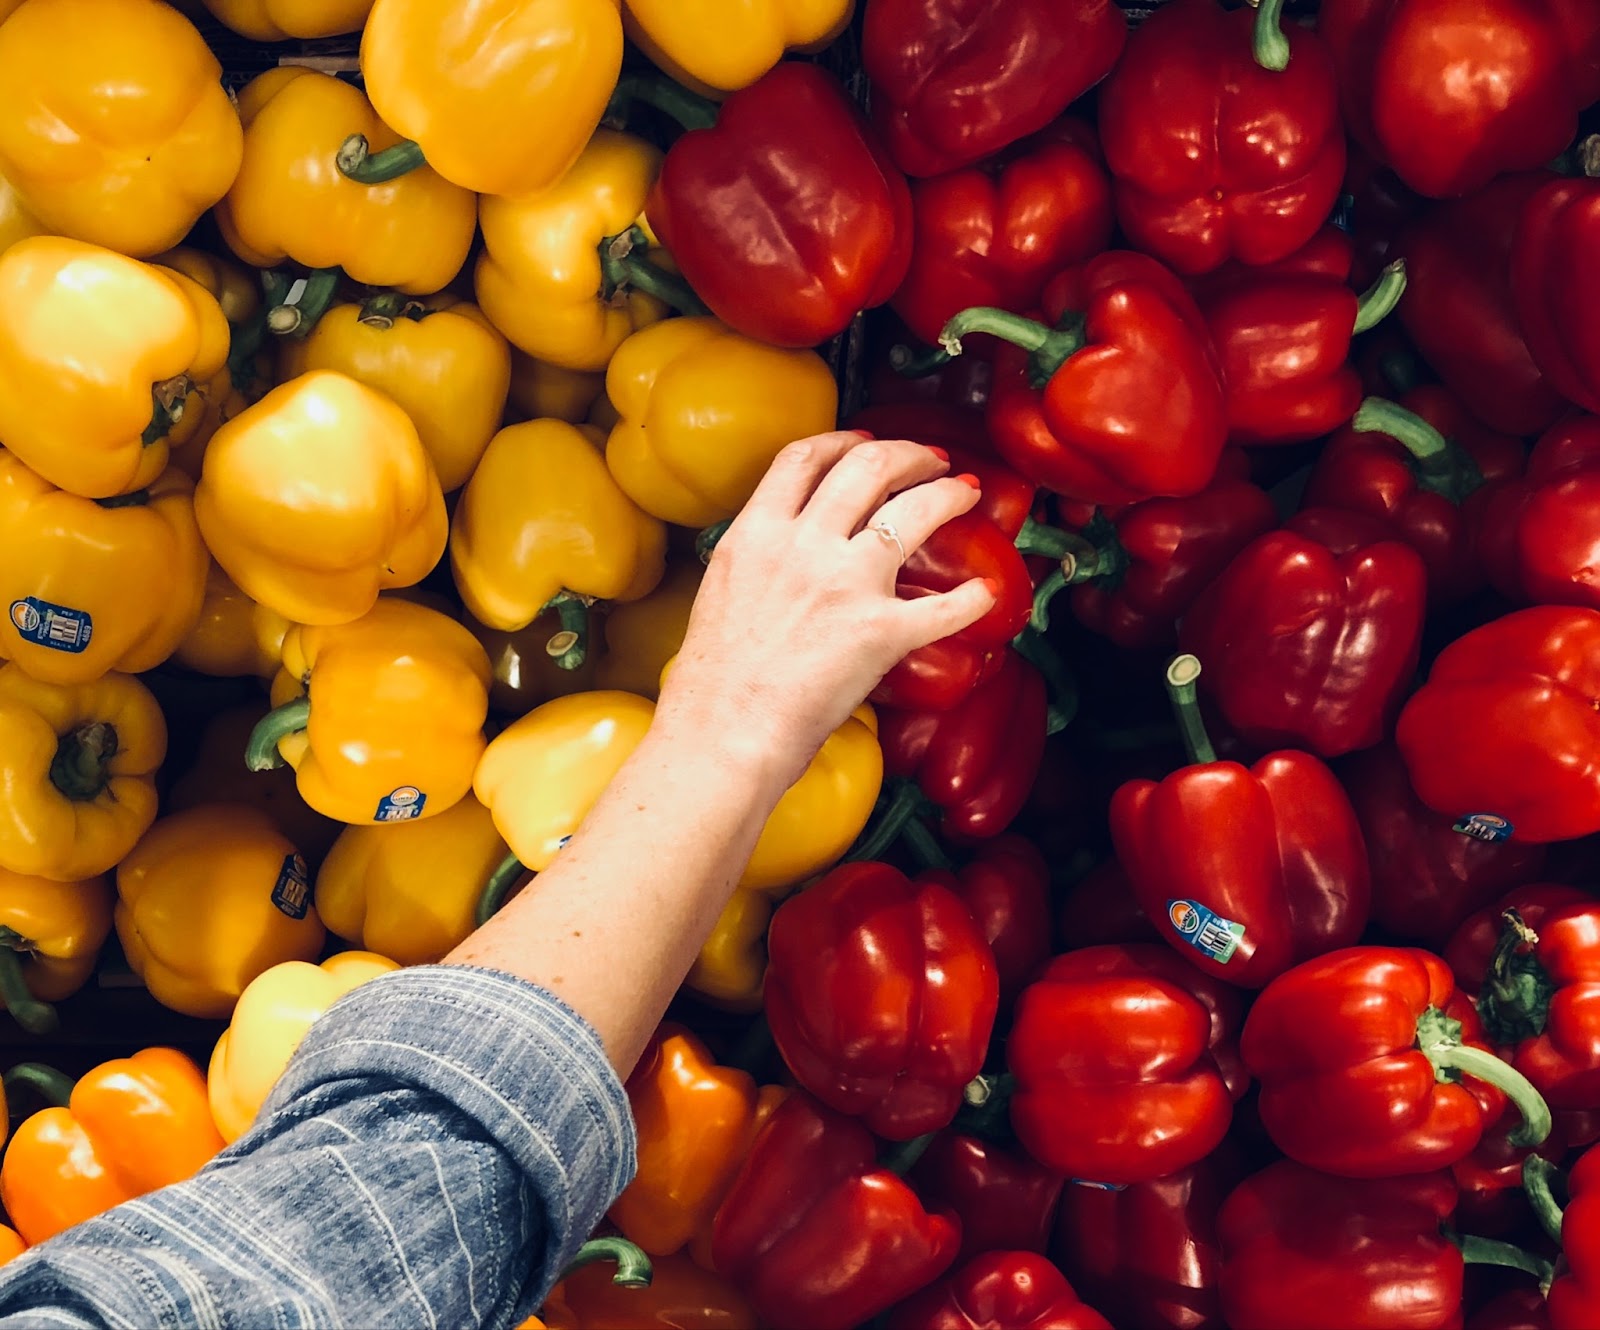 How To Shop Food More Sustainably